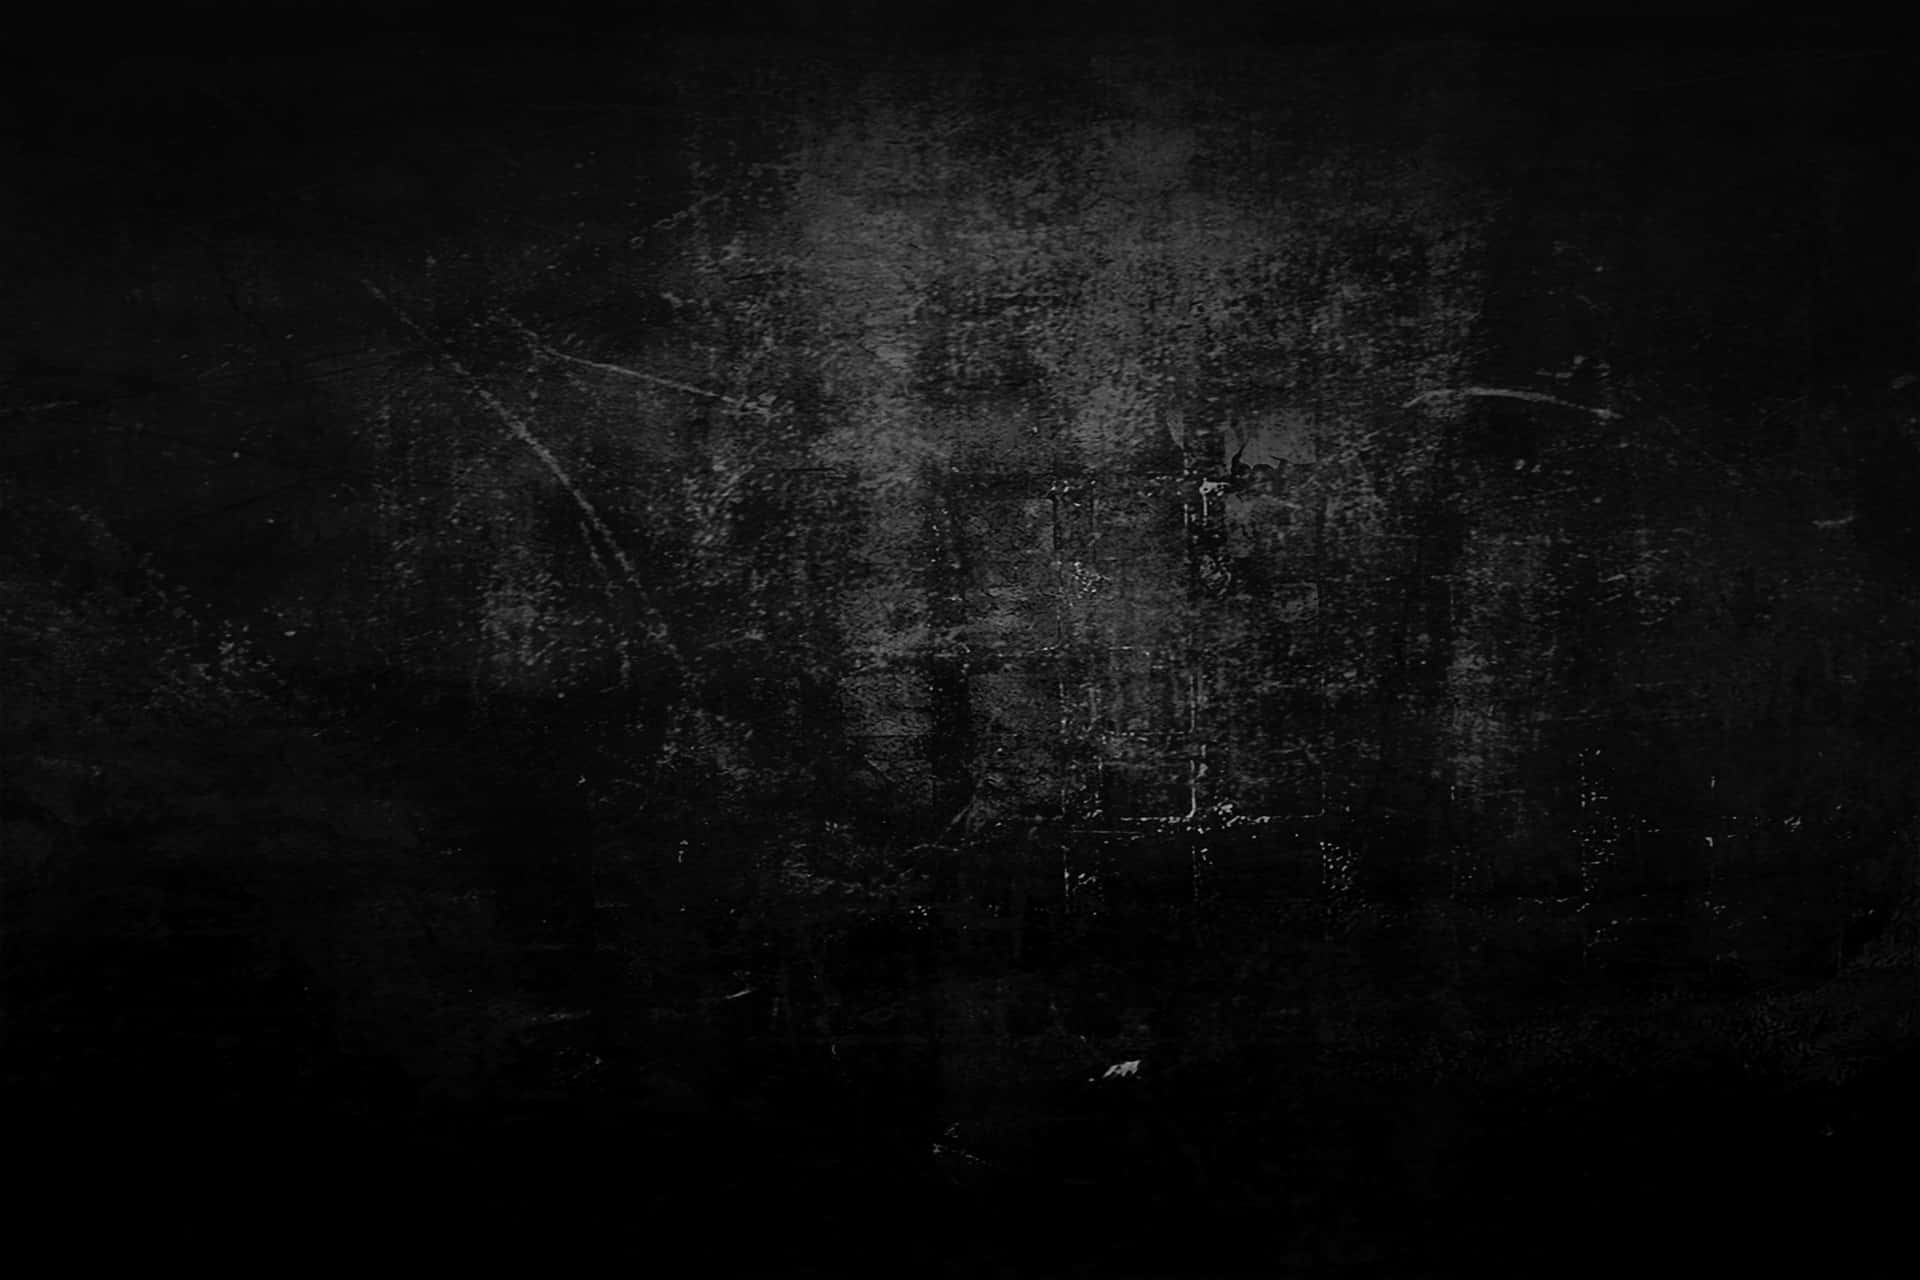 An edgy aesthetic view of black grunge. Wallpaper